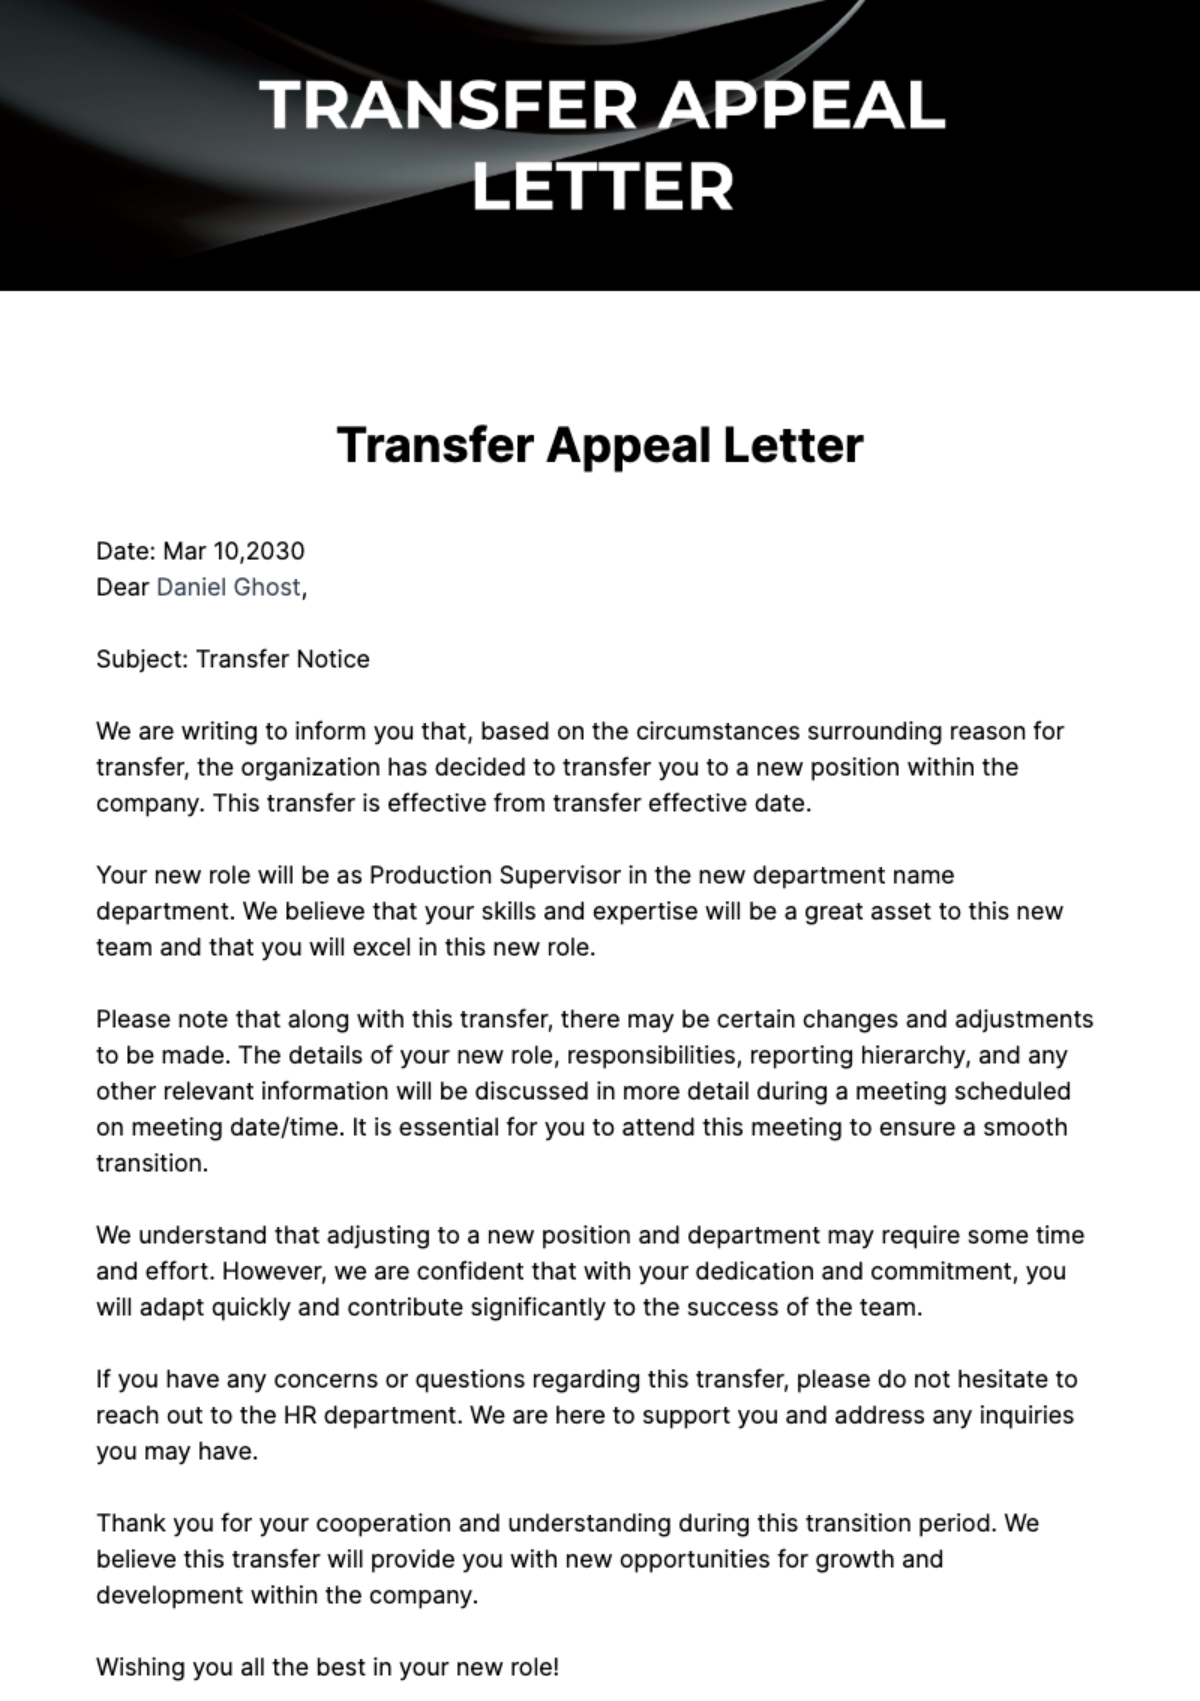 Free Transfer Appeal Letter Template